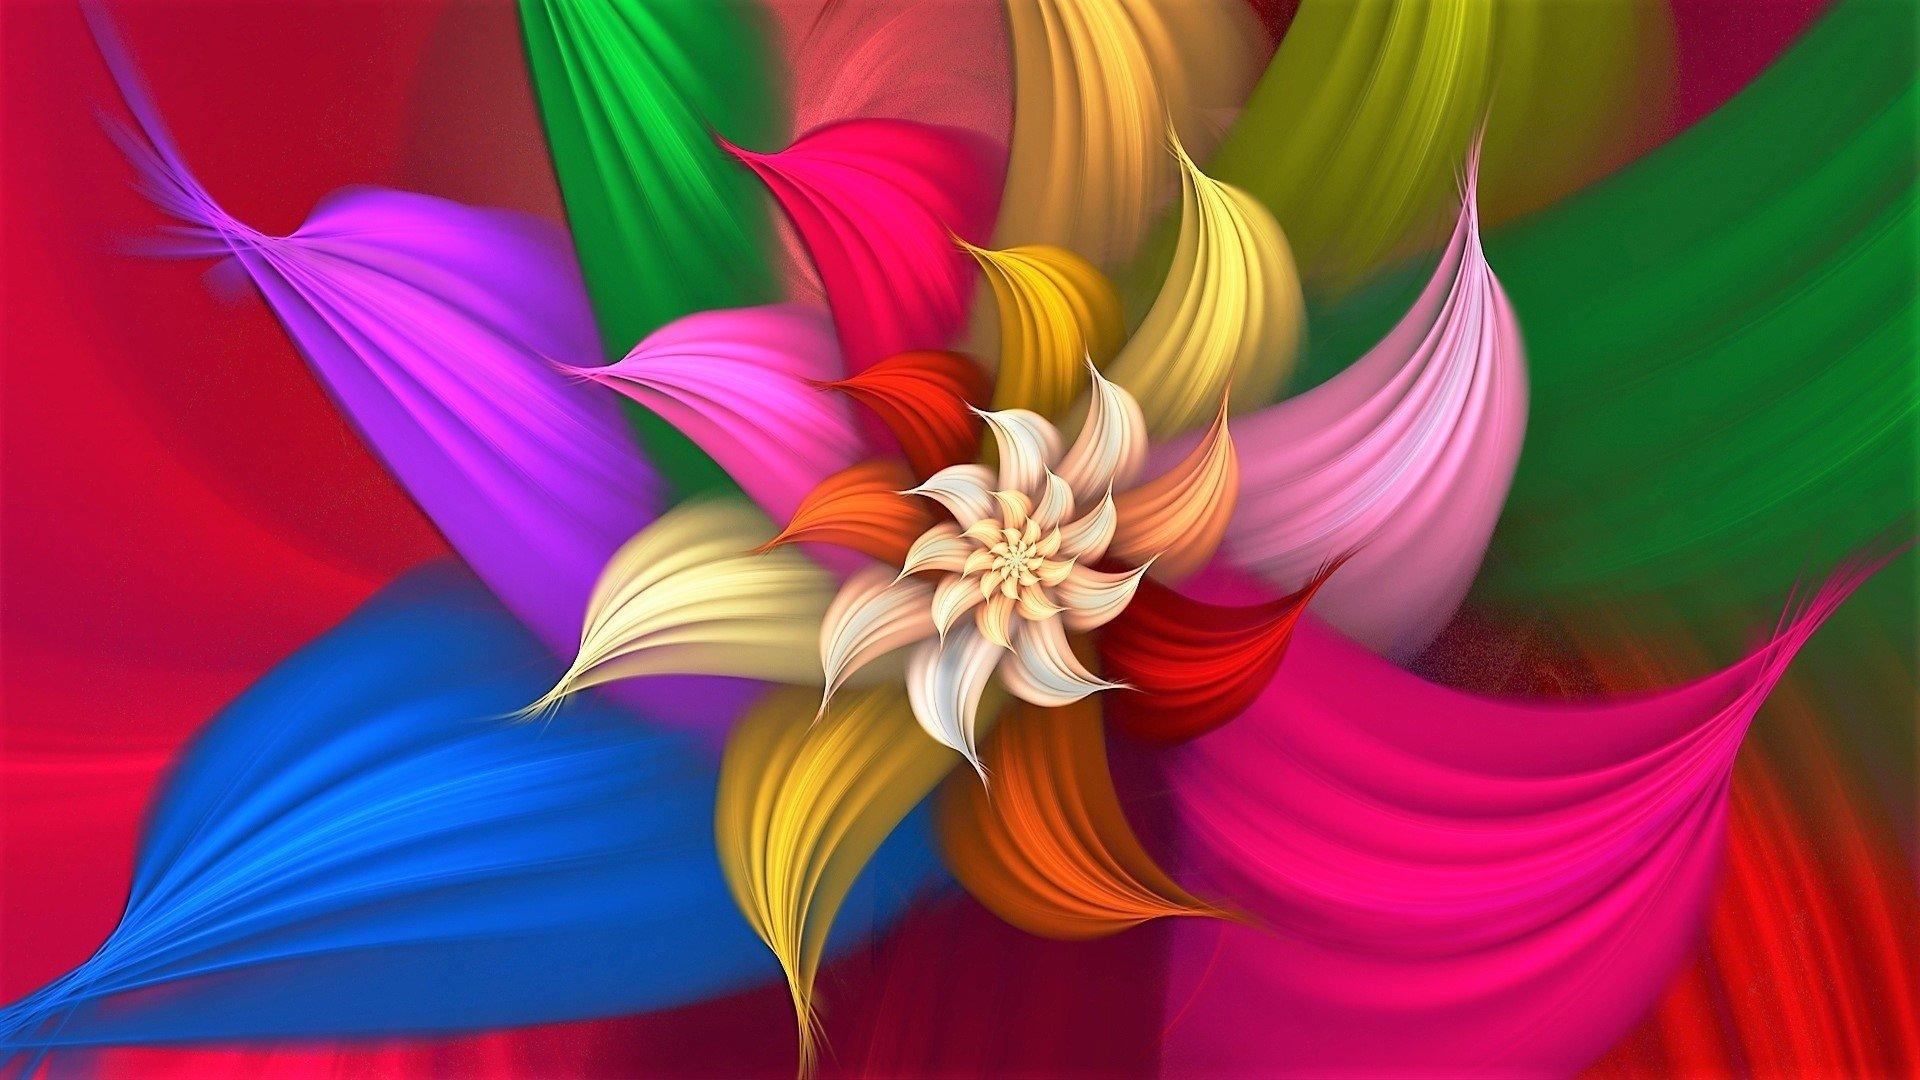 Colorful Abstract Flower HD Wallpapers